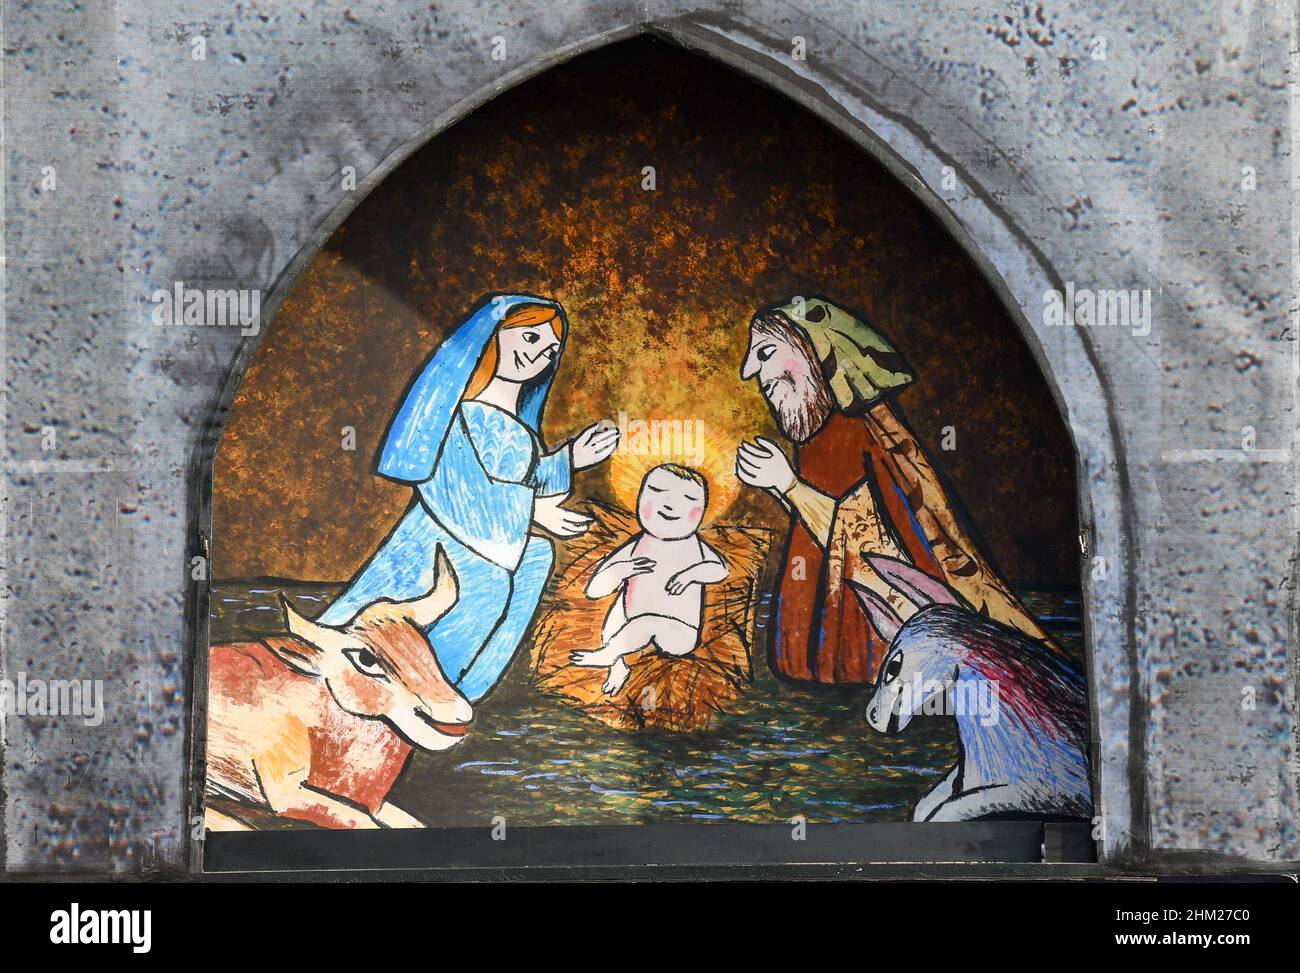 Detail of the nativity scene of the Advent Calendar by Emanuele Luzzati in Piazza Vittorio Veneto during the Christmas Holidays, Turin, Piedmont Stock Photo